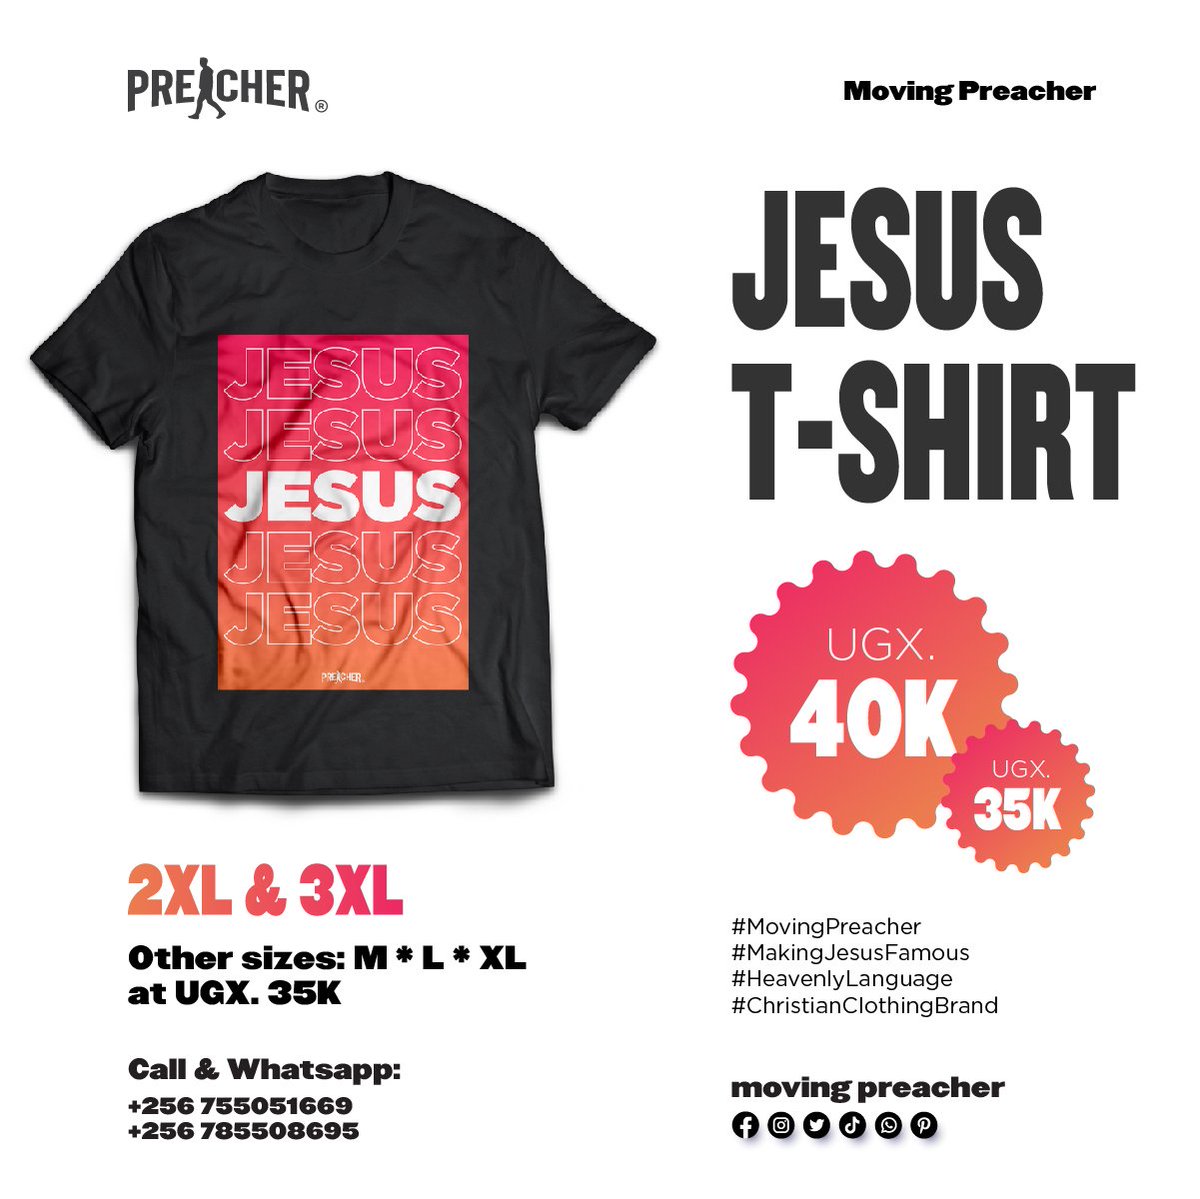 Did you get yourself this tee? 
Order for it Now: 0755051669 or 0785505695

#MovingPreacher #MakingJesusFamous #ChristianClothingLine #christianclothingbrand #BeAMovingPreacher #TheStreetPreachersCampaign